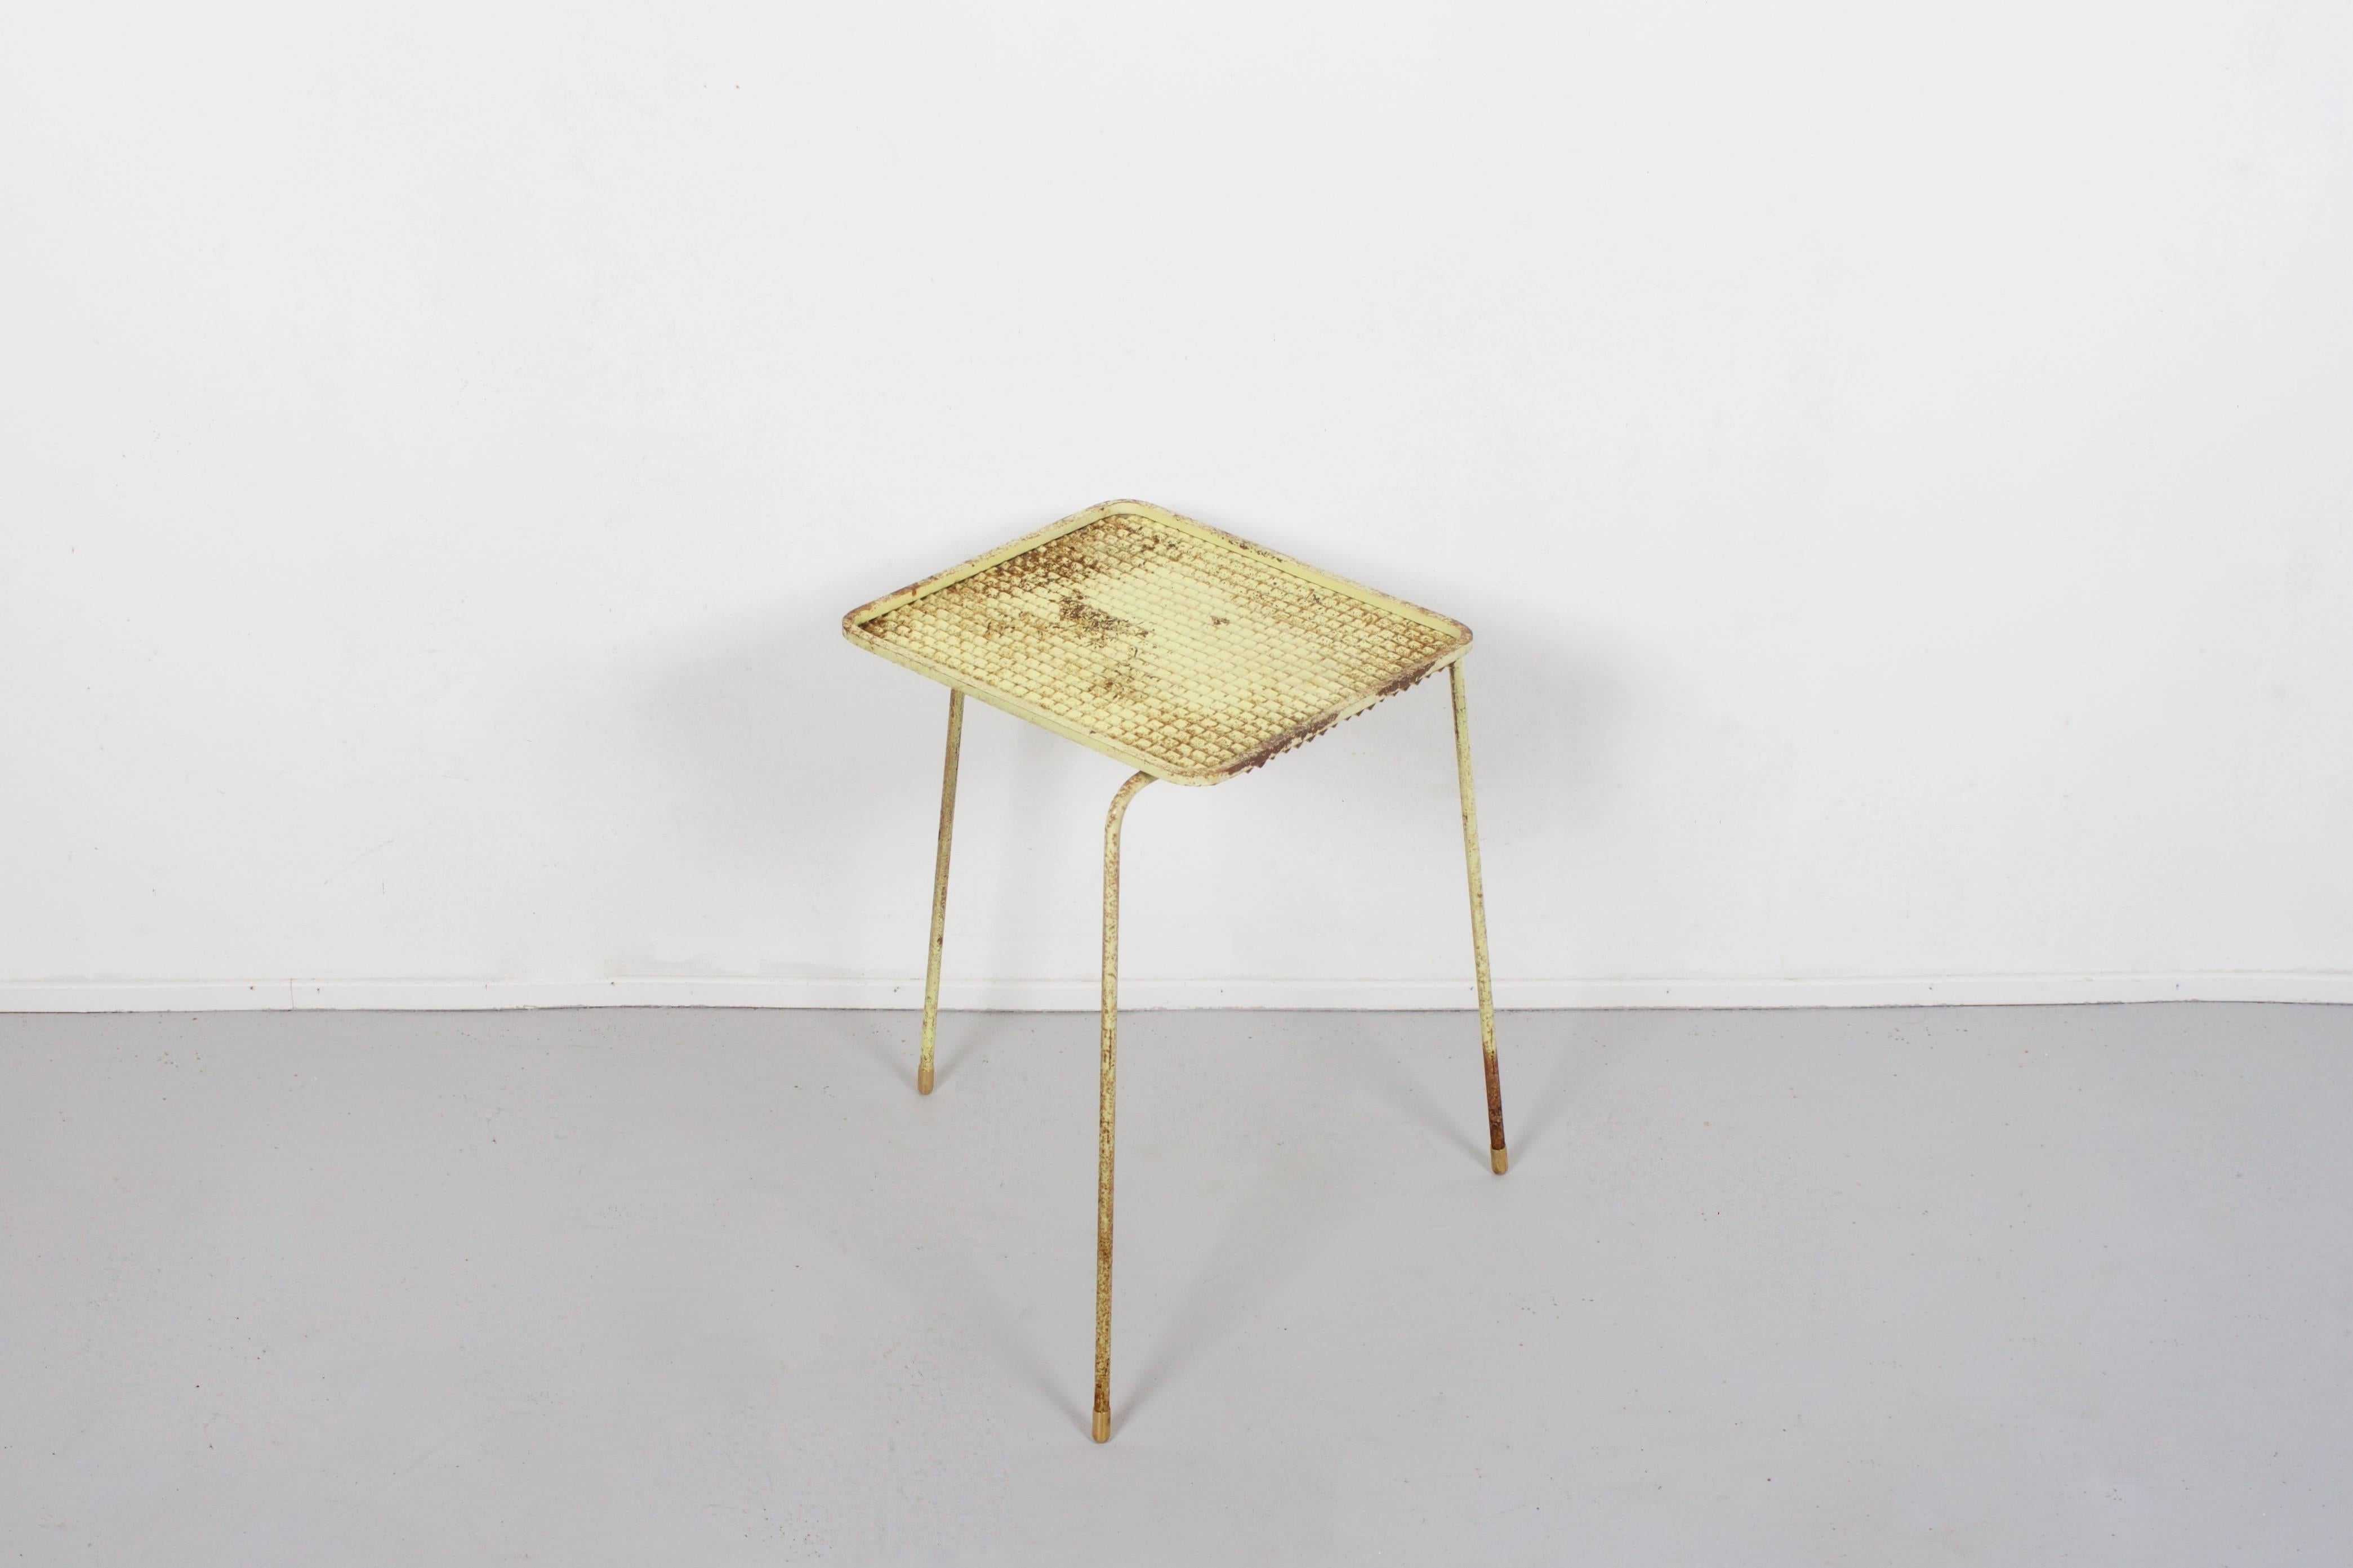 All original Mathieu Matégot 'Soumba' nesting tables in orange, black and yellow.

These tables are in original condition.

The metal table tops are textured and supported by three metal legs.

There are small brass feet mounted on the end of